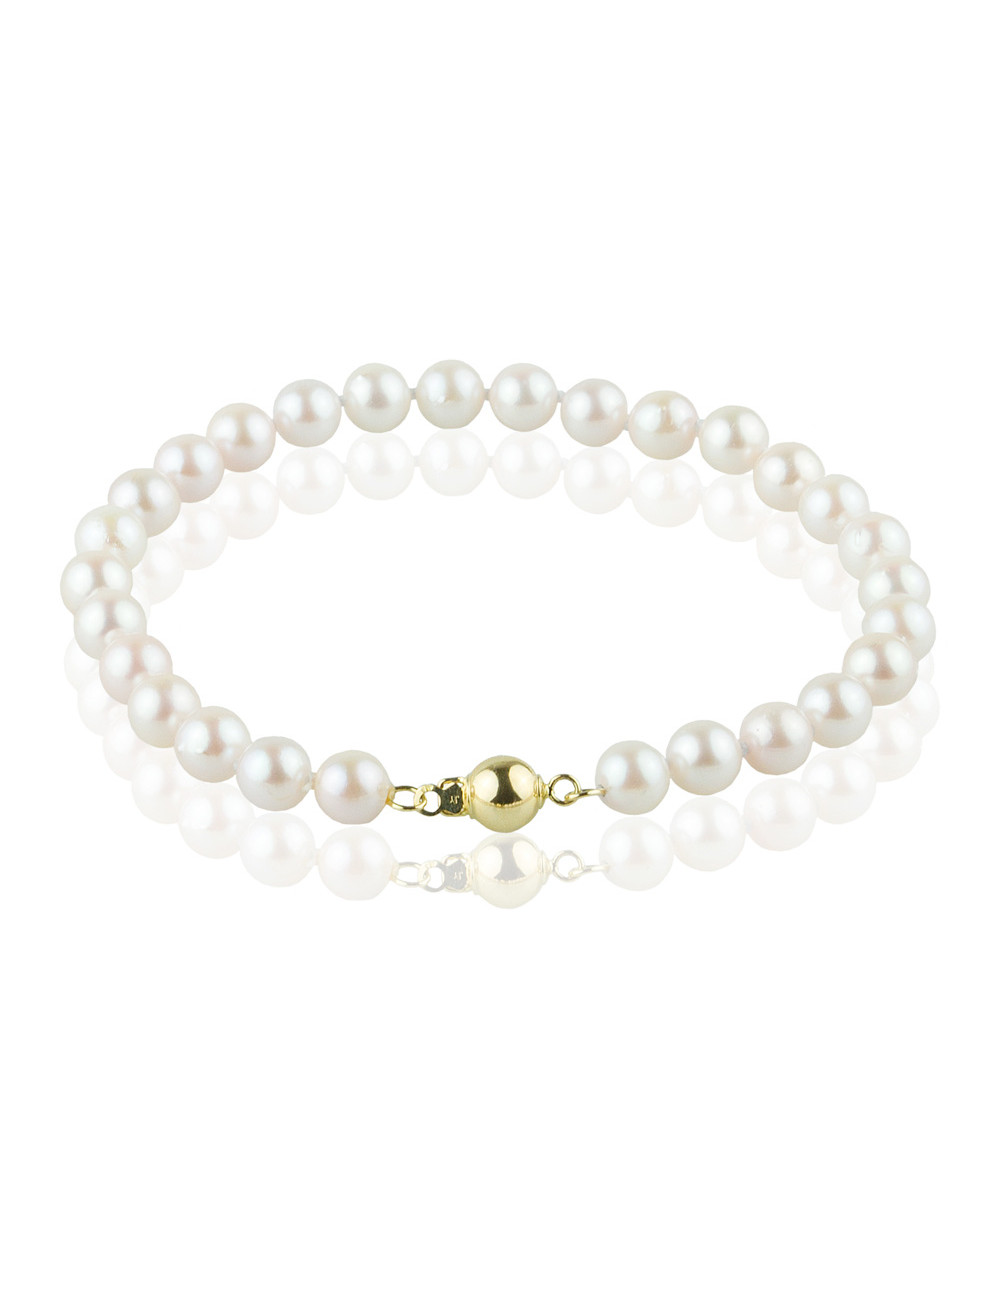 Bracelet of small white Akoya pearls with yellow gold ball clasp BM5560G3